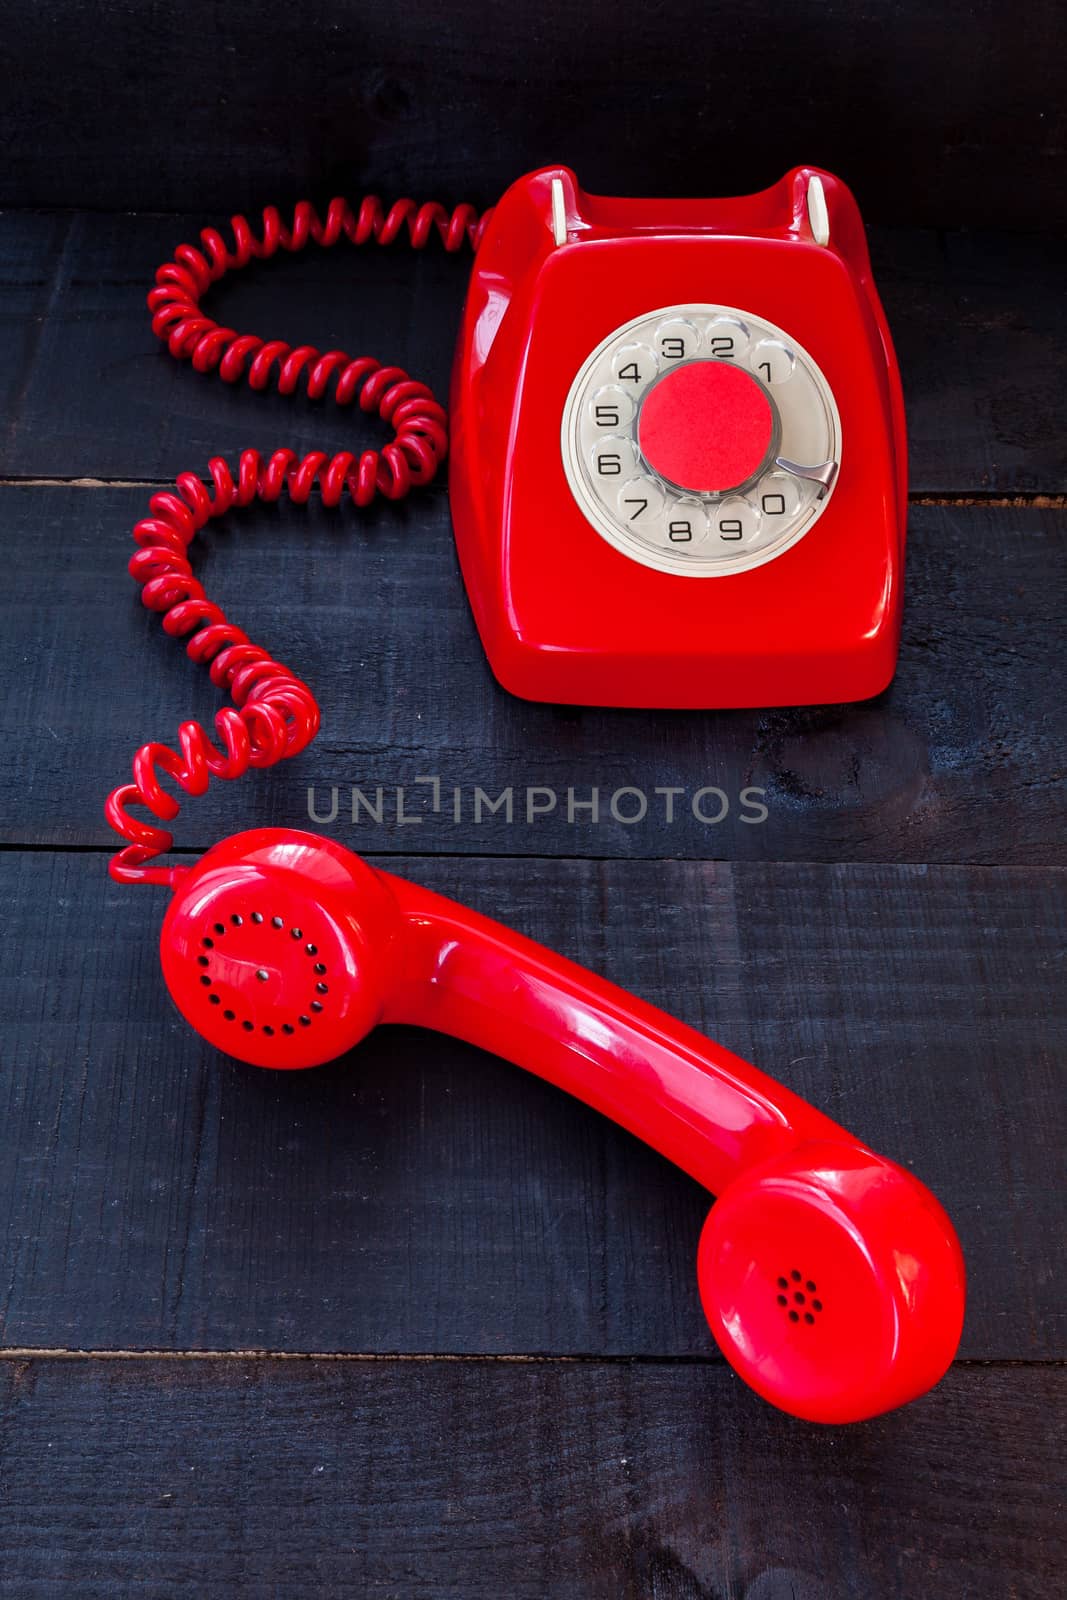 The image represents a vintage red phone on a dark wood background conceptualizing communication or lack thereof